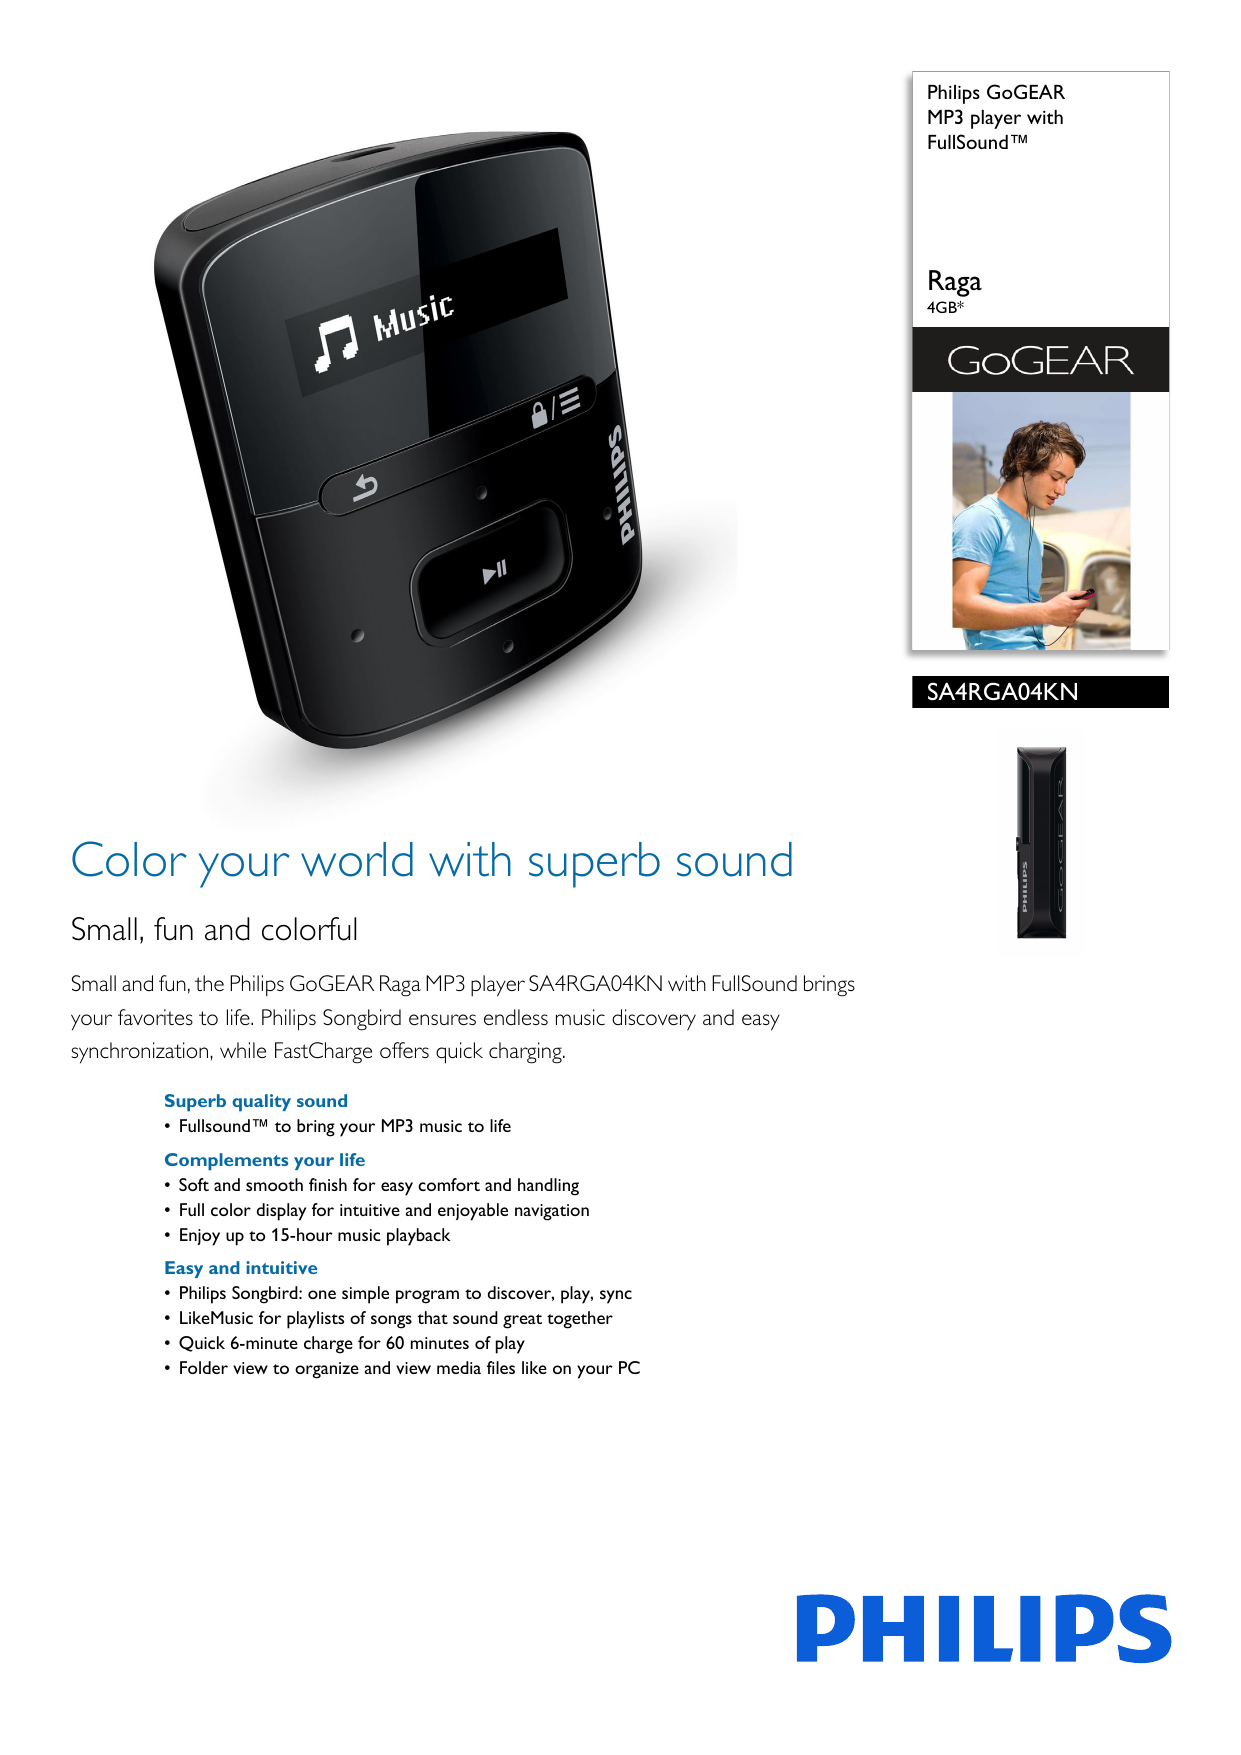 how to put music on a philips gogear mp3 player